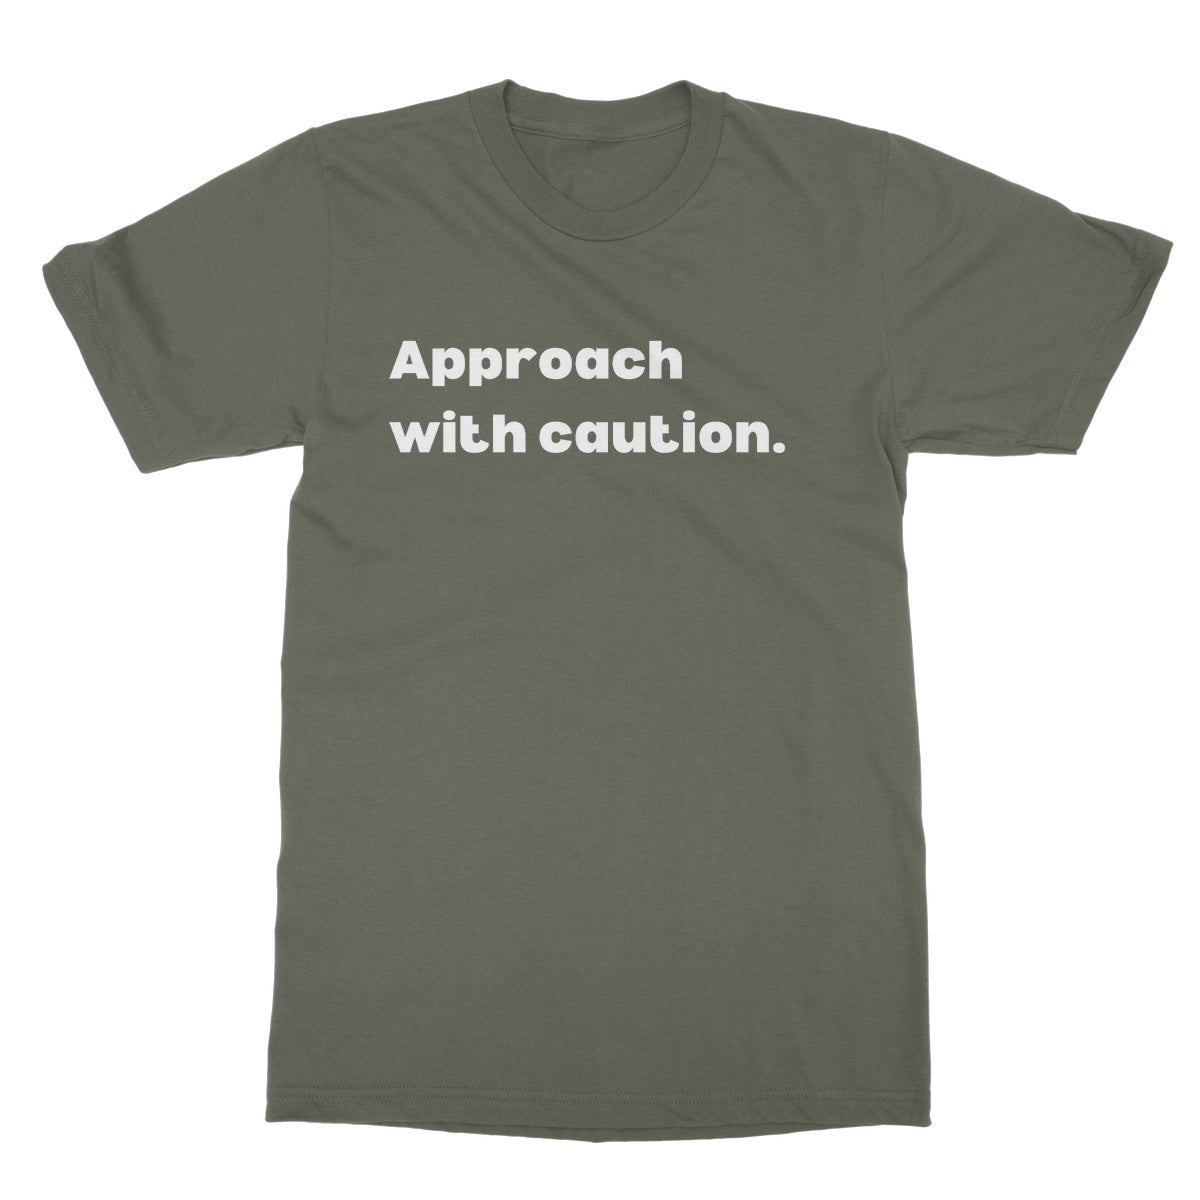 Approach with caution T-Shirt